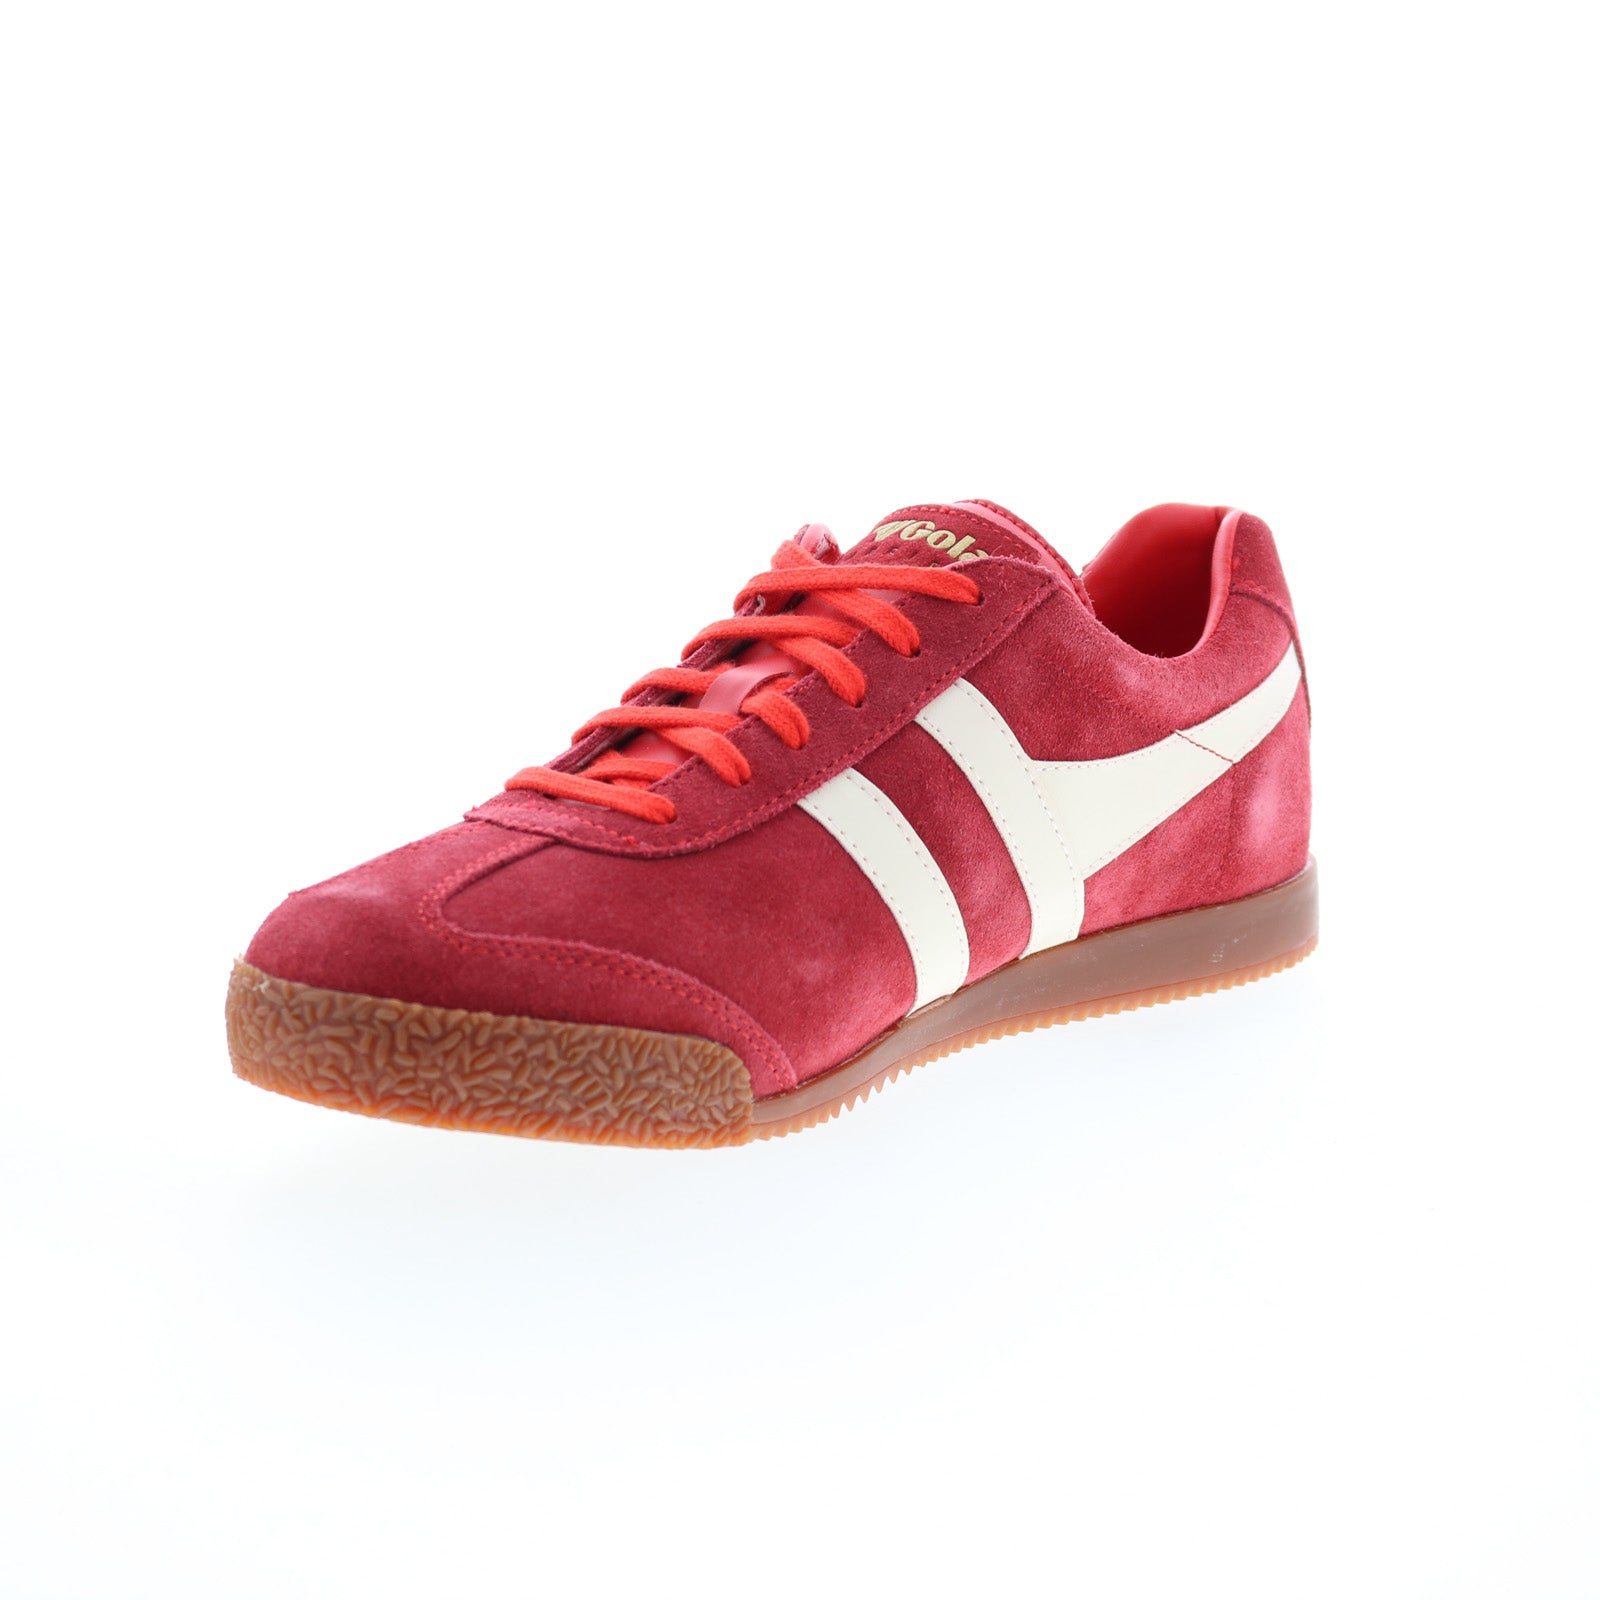 Gola Harrier Suede CMA192 Mens Red Suede Lace Up Lifestyle Sneakers Shoes